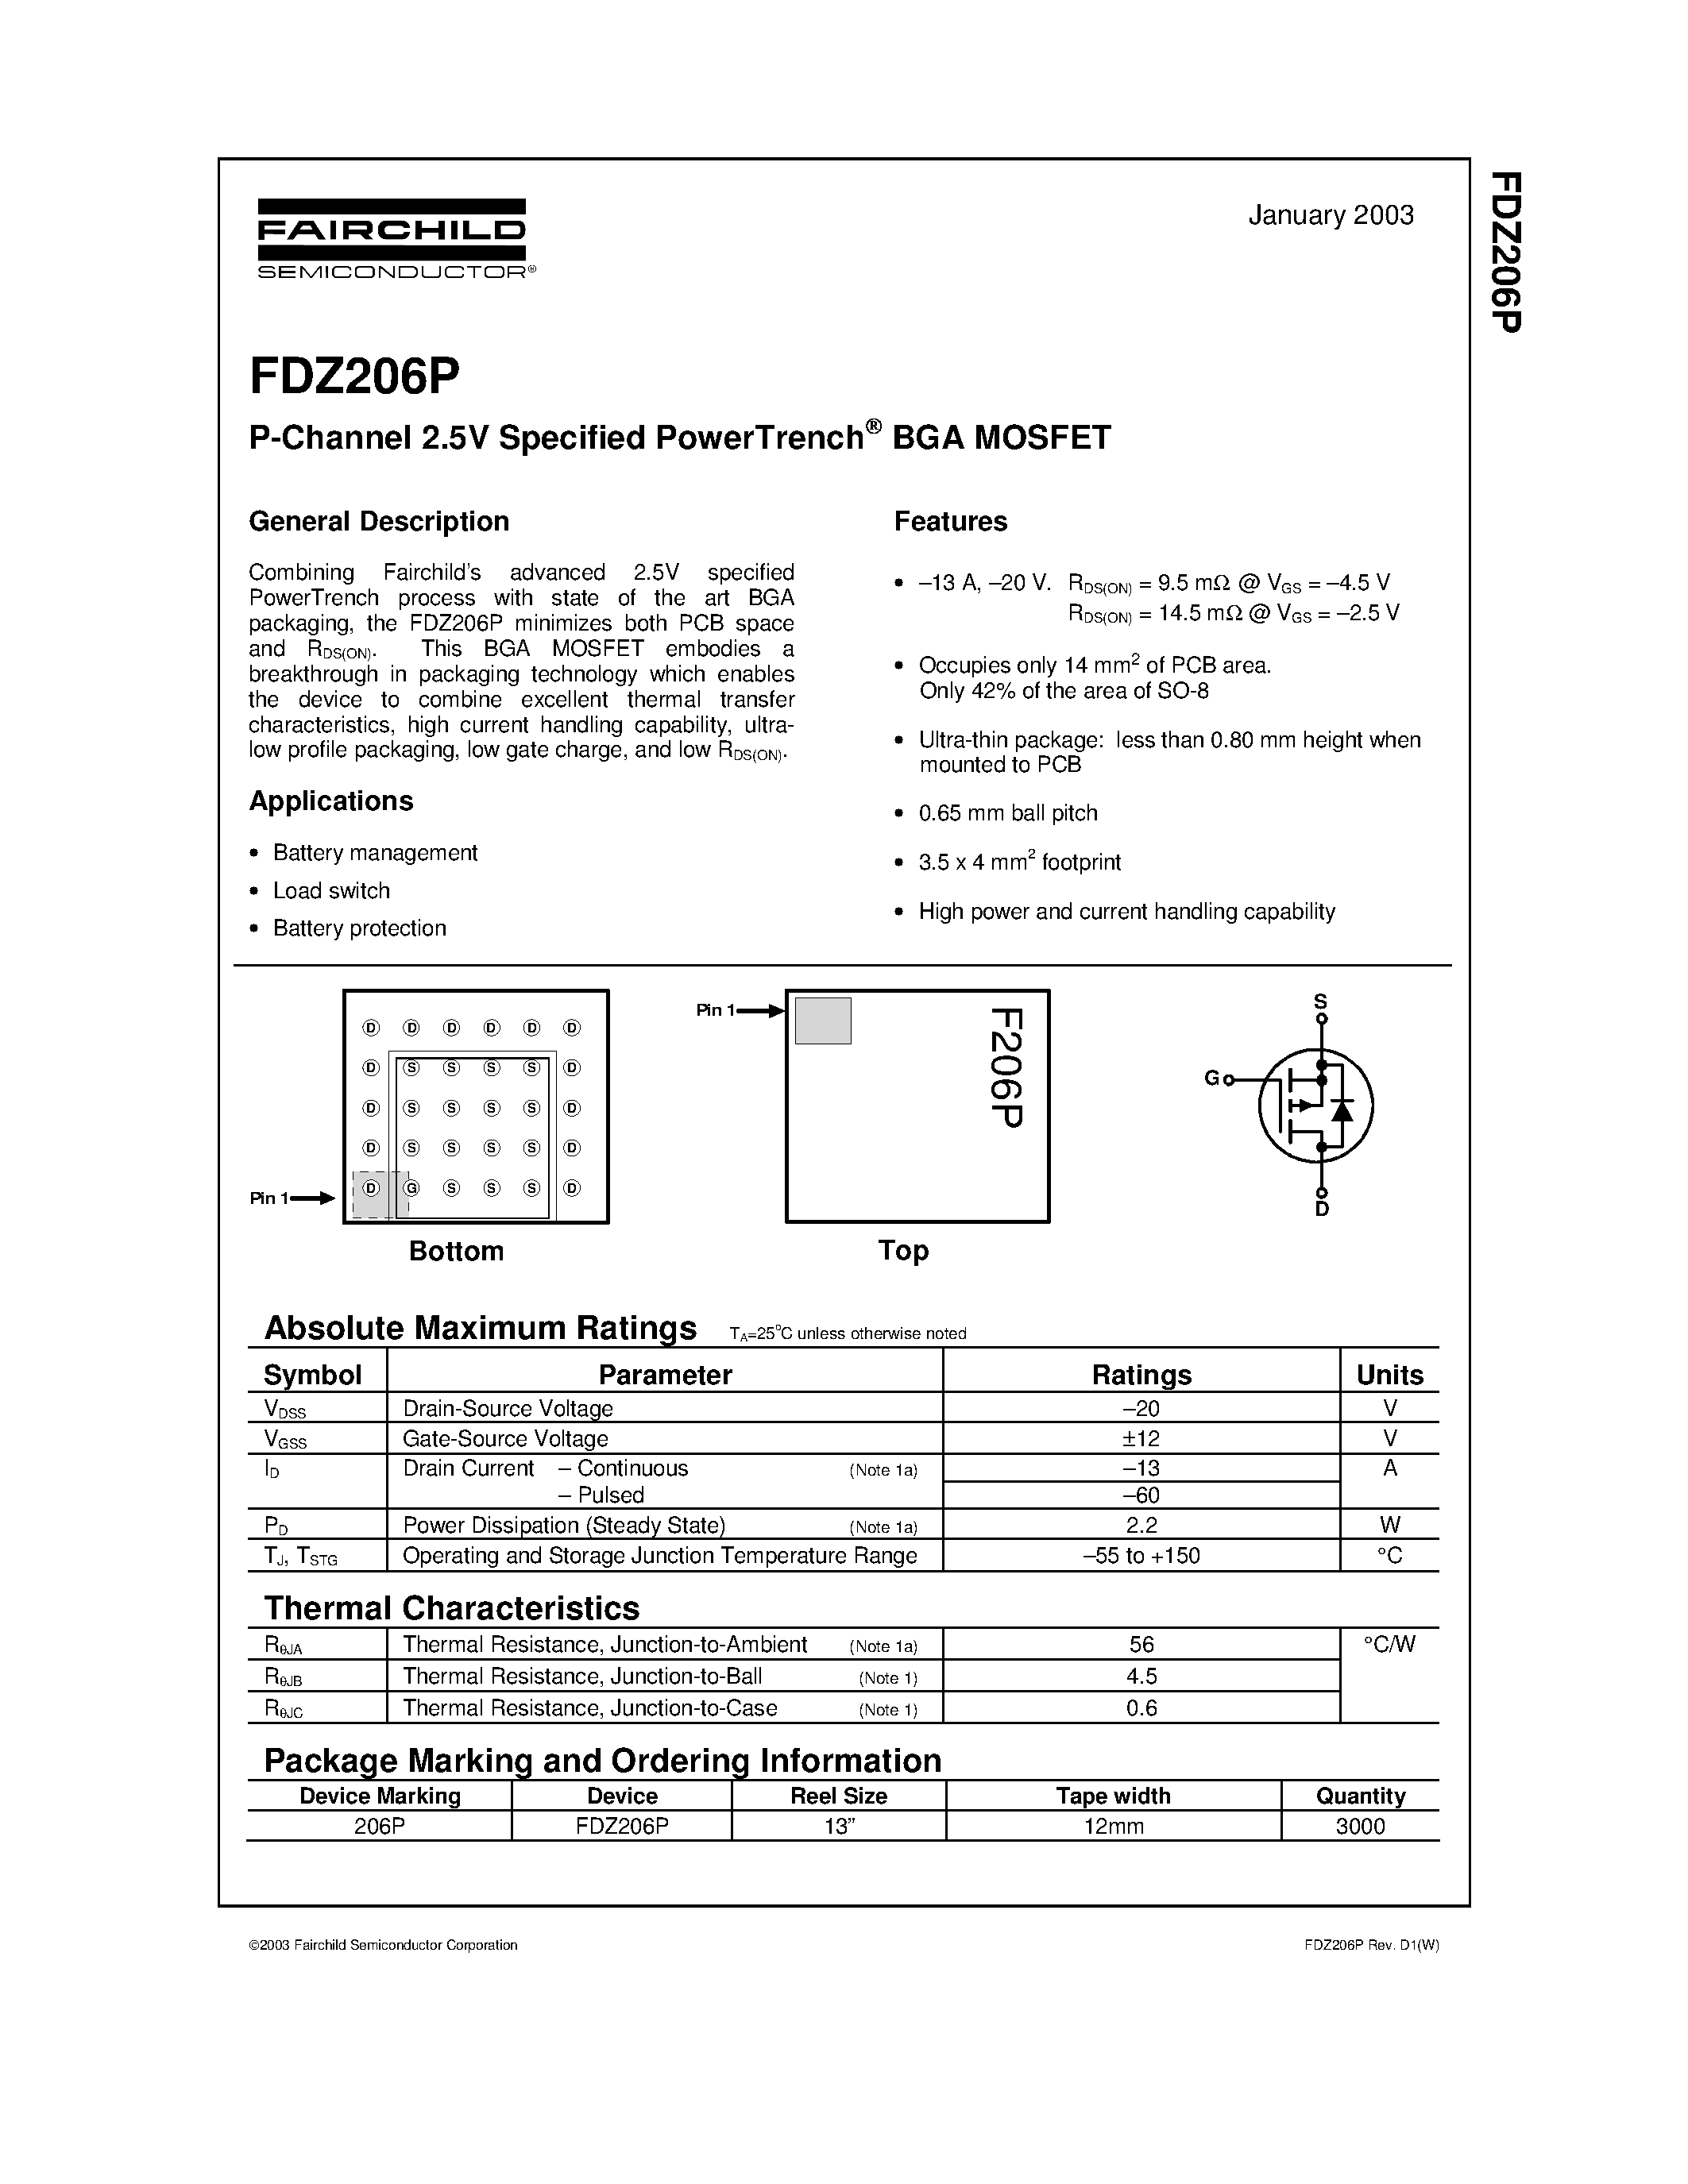 Datasheet FDZ206P - P-Channel 2.5V Specified PowerTrench page 1